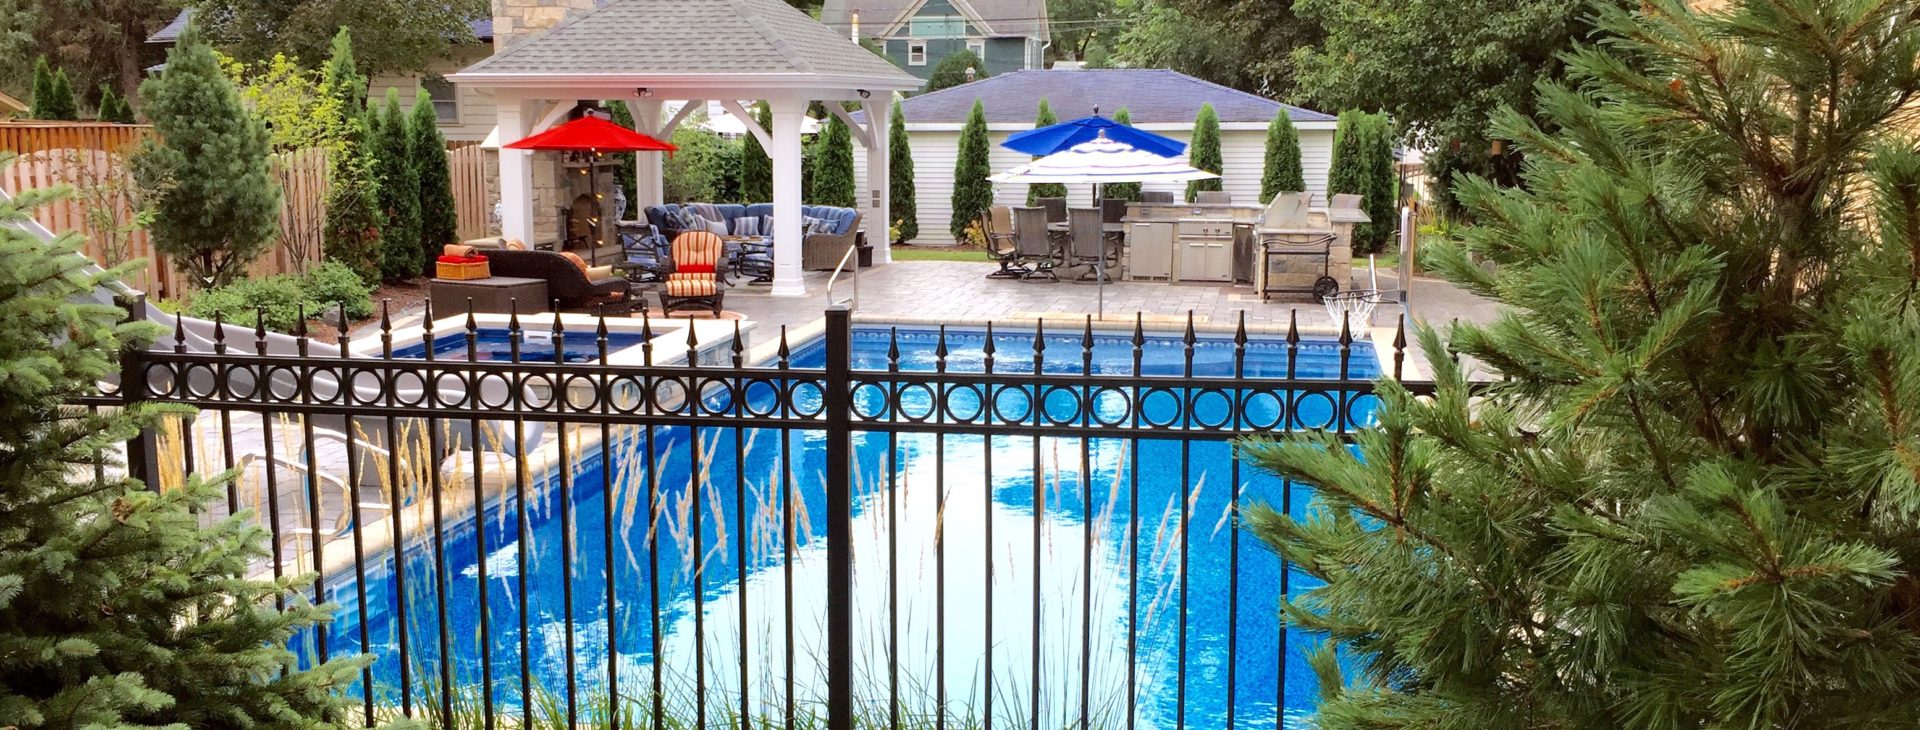 Secure Your Property and Pool with Fences